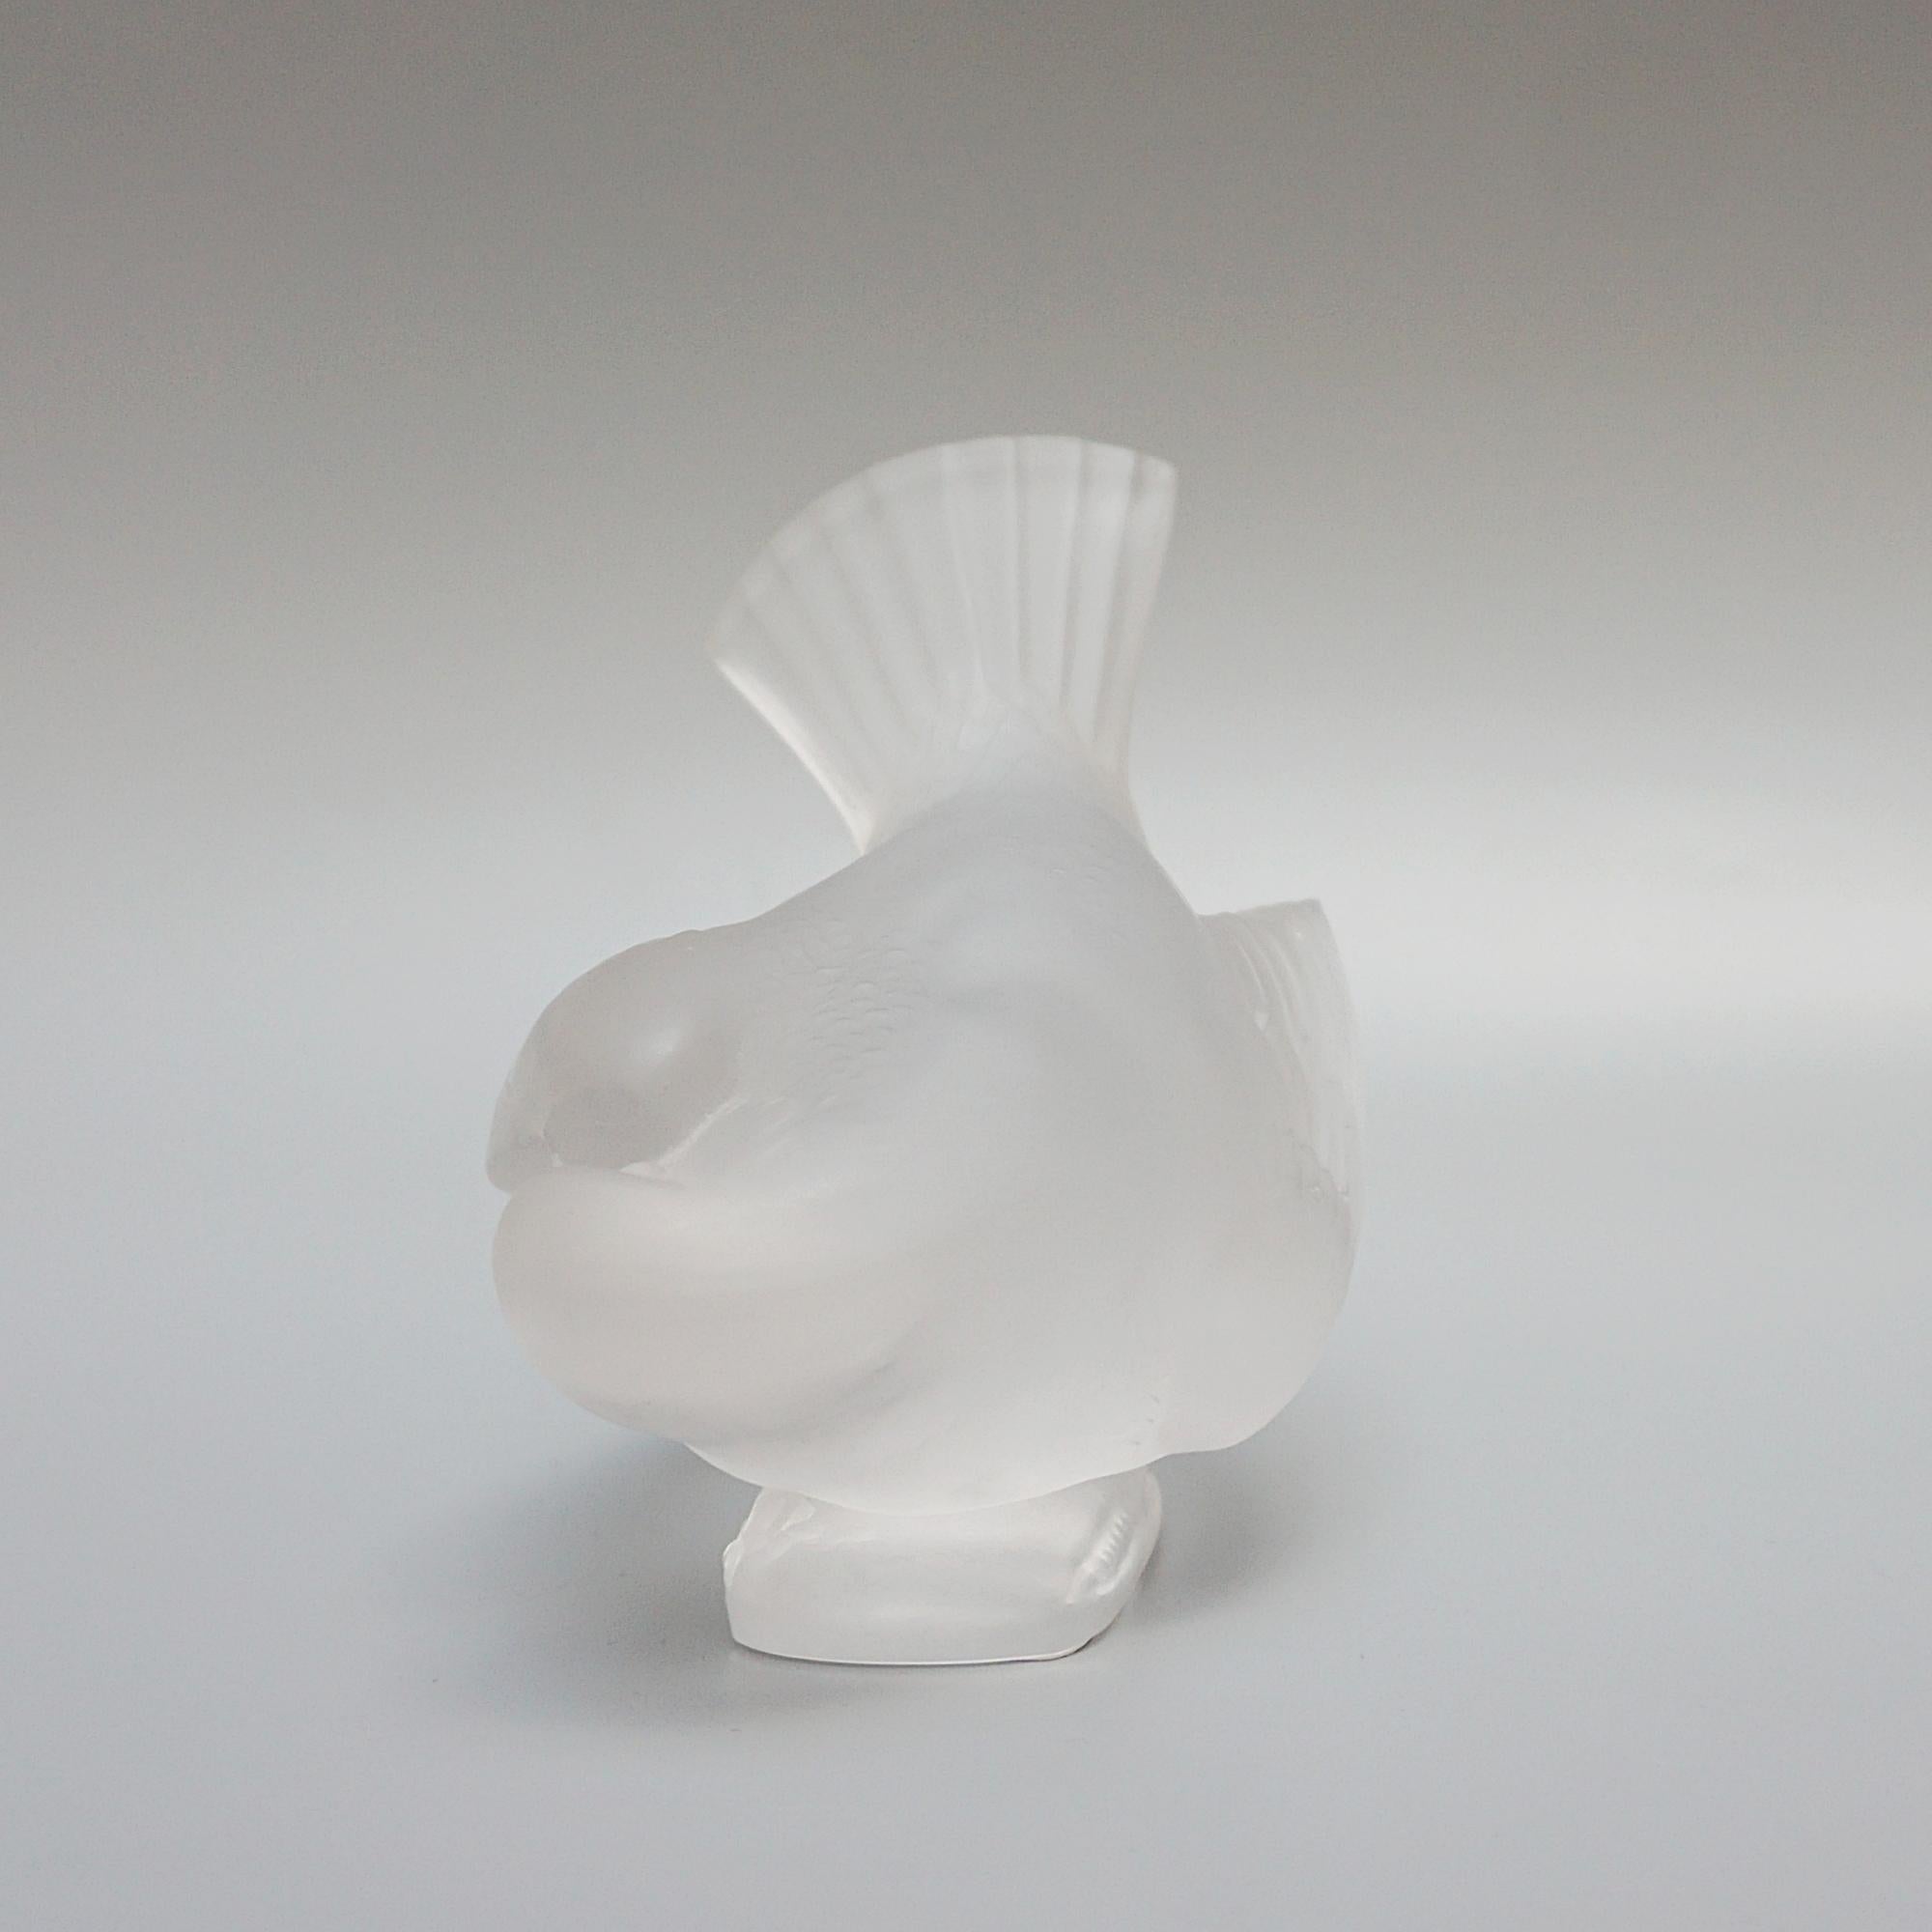 'Moineau Coquet' A Glass Bird Paperweight by Marc Lalique (1900 - 1977) 1